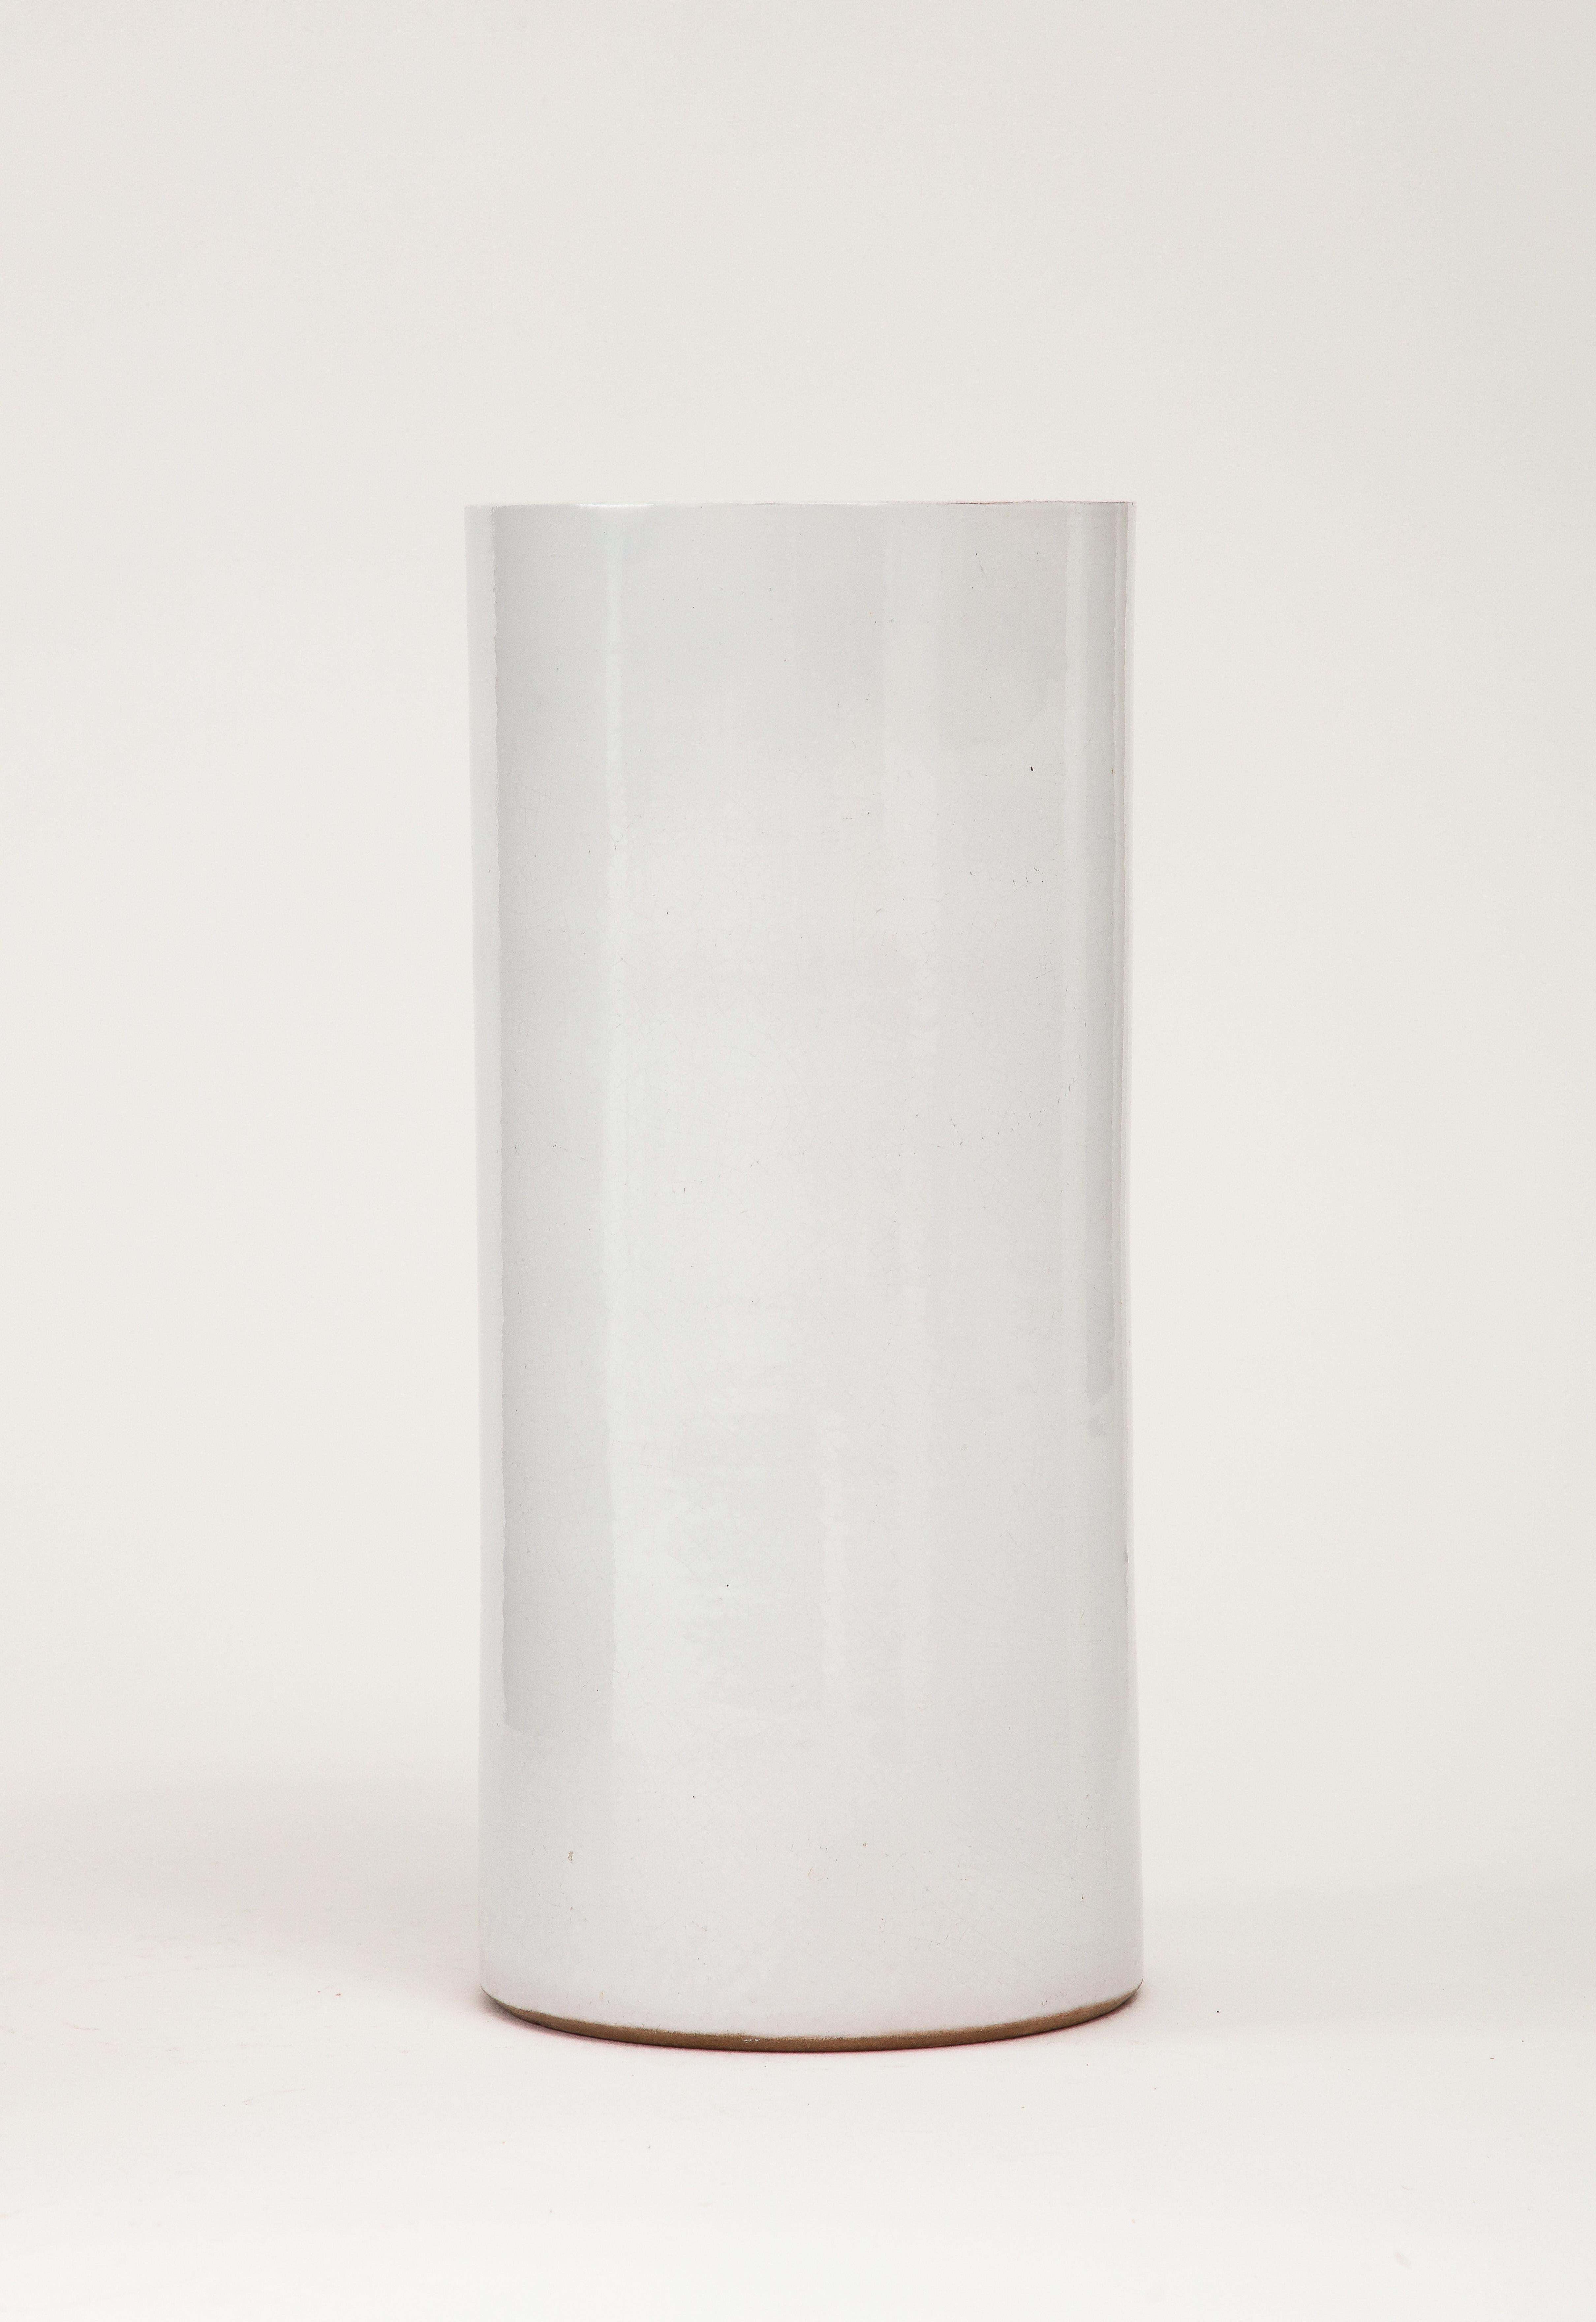 Grey White Crackle Glaze Cylindrical Vase, France, c. 1950's In Good Condition For Sale In Brooklyn, NY